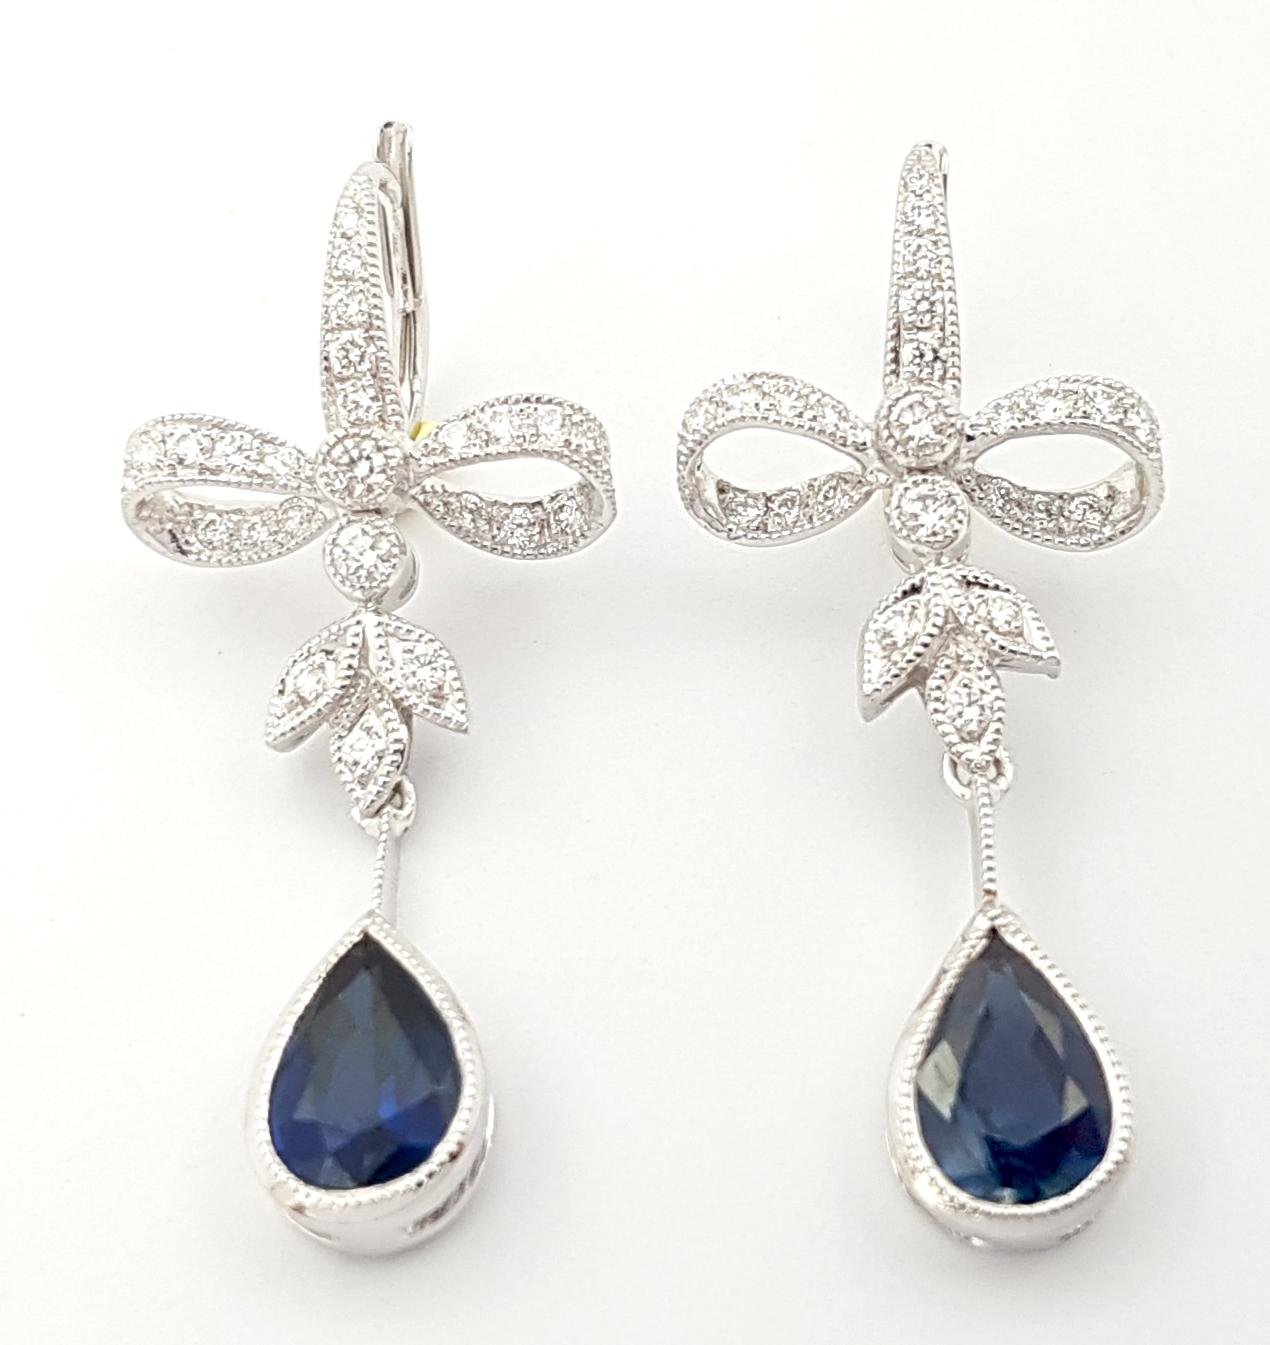 Blue Sapphire 2.15 carats with Diamond 0.48 carat Earring set in 18 Karat White Gold Settings

Width: 1.4 cm 
Length: 3.2 cm
Total Weight: 3.98 grams

